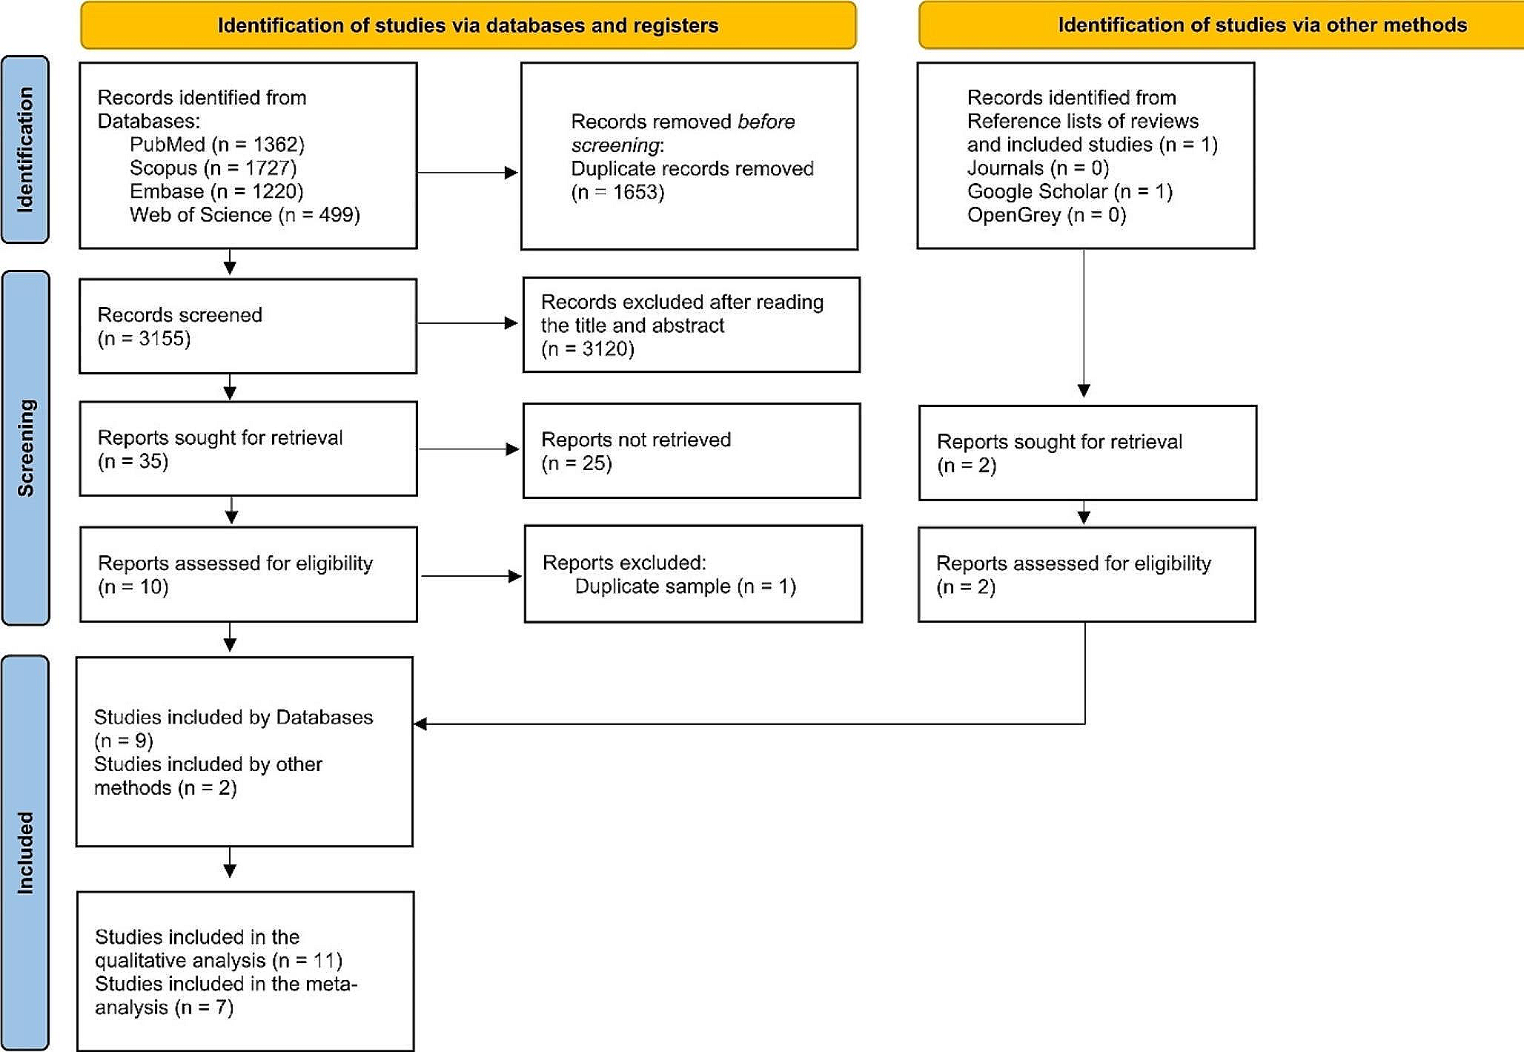 Genetics and sleep bruxism: a systematic review and meta-analysis of studies with twins